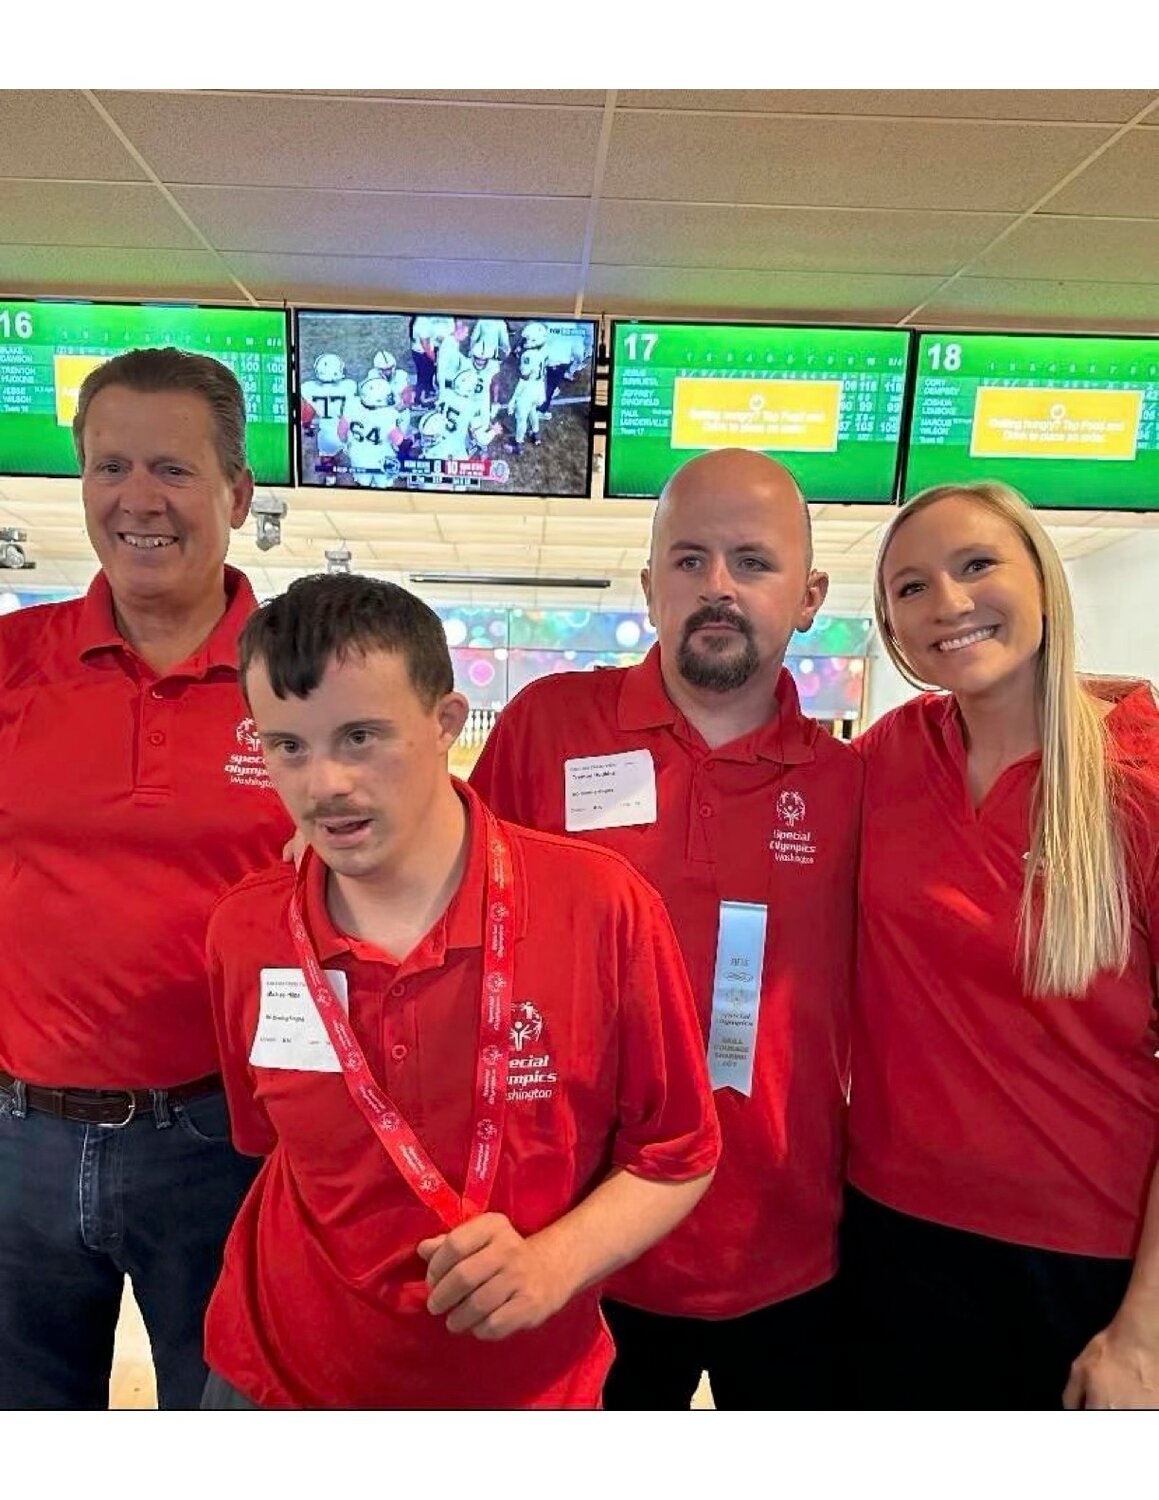 Chelan Special Olympics athletes pose with their coaches at a bowling competition. From left to right are assistant coach Steve Hilde, athlete Michael Hilde, athlete Trenton Hudkins, and coach Brooke Sanders.